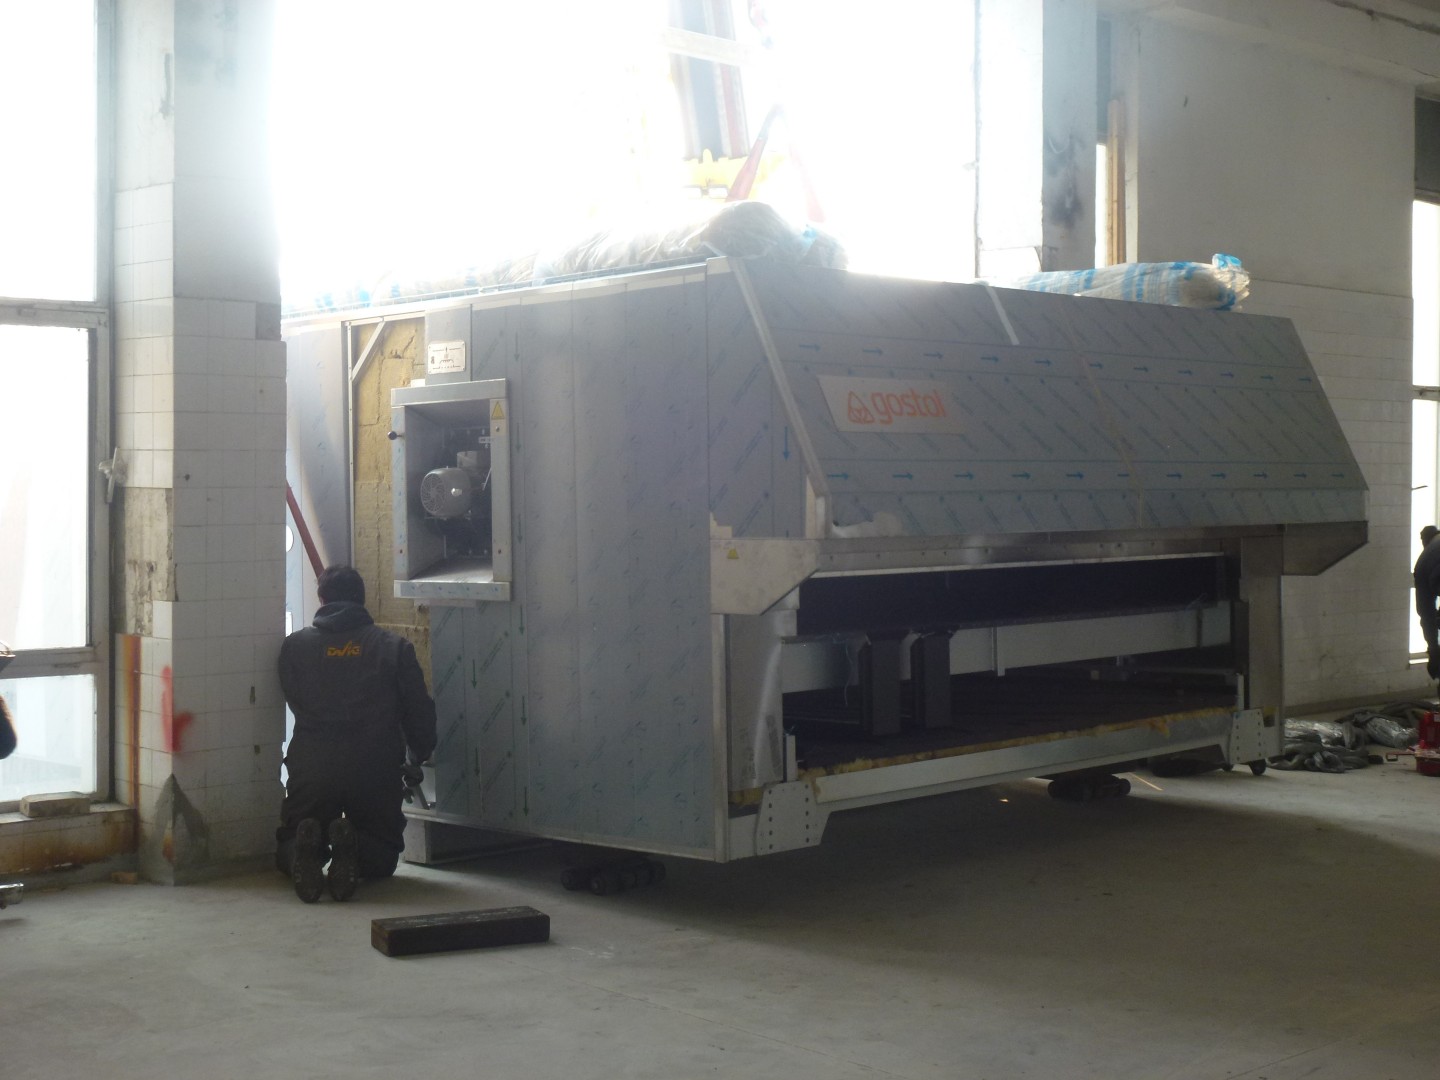 Specific logisic work at intaking of Gostol tunnel baking oven into bakery in Serbia